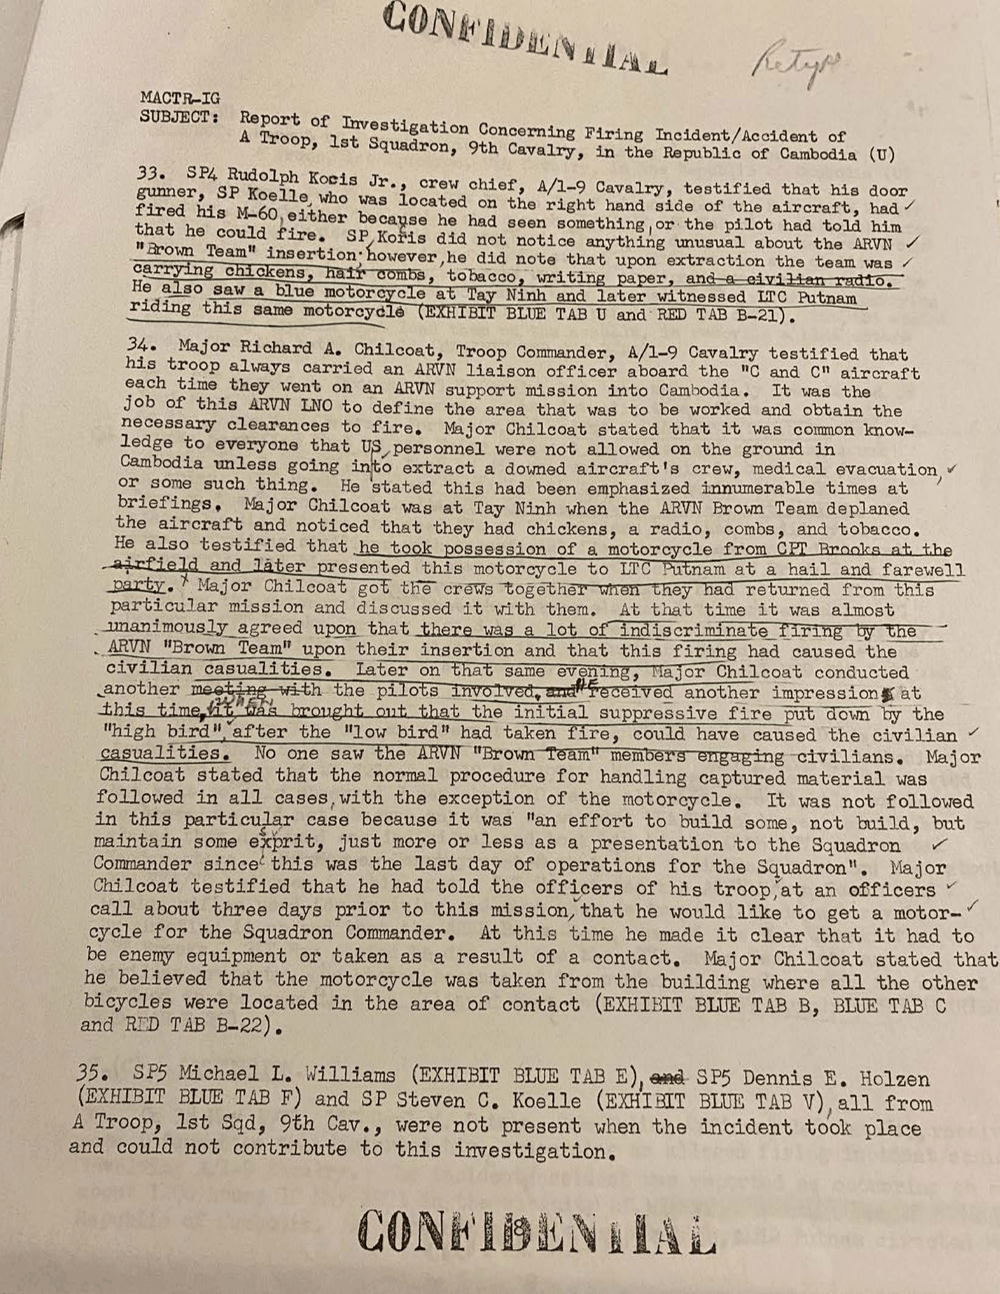 Page 28 from Excerpts-From-An-Exclusive-Archive-Of-US-Military-Documents-Compiled-by-The Intercept